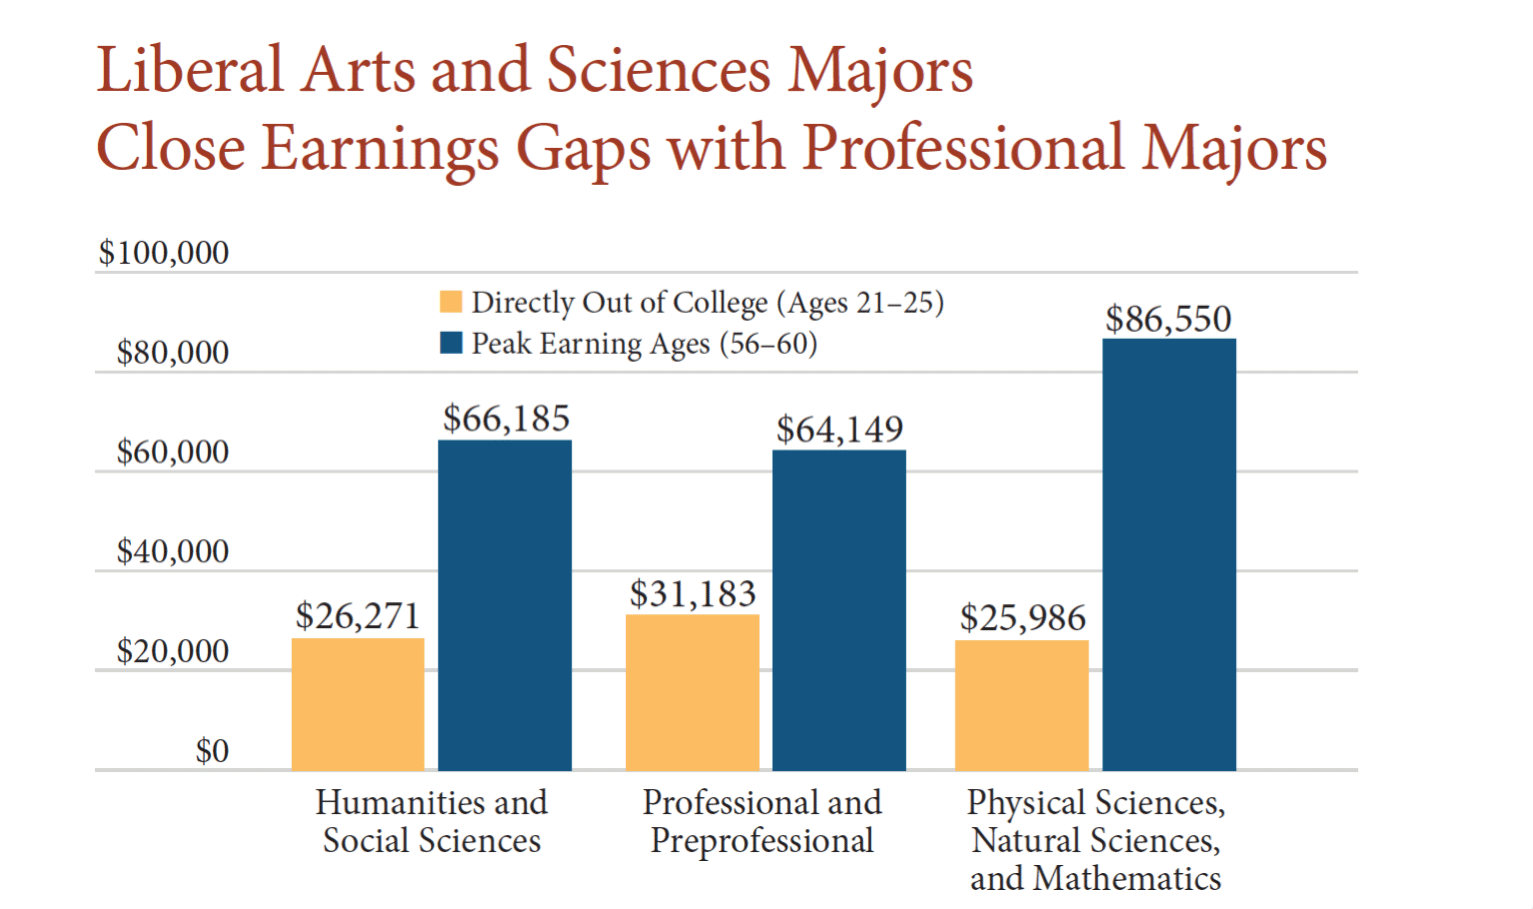 From “Liberal Arts Graduates and Employment: Setting the Record Straight,” available at www.aacu.org/leap/documents/nchems.pdf, and reprinted courtesy of the AAC&U.